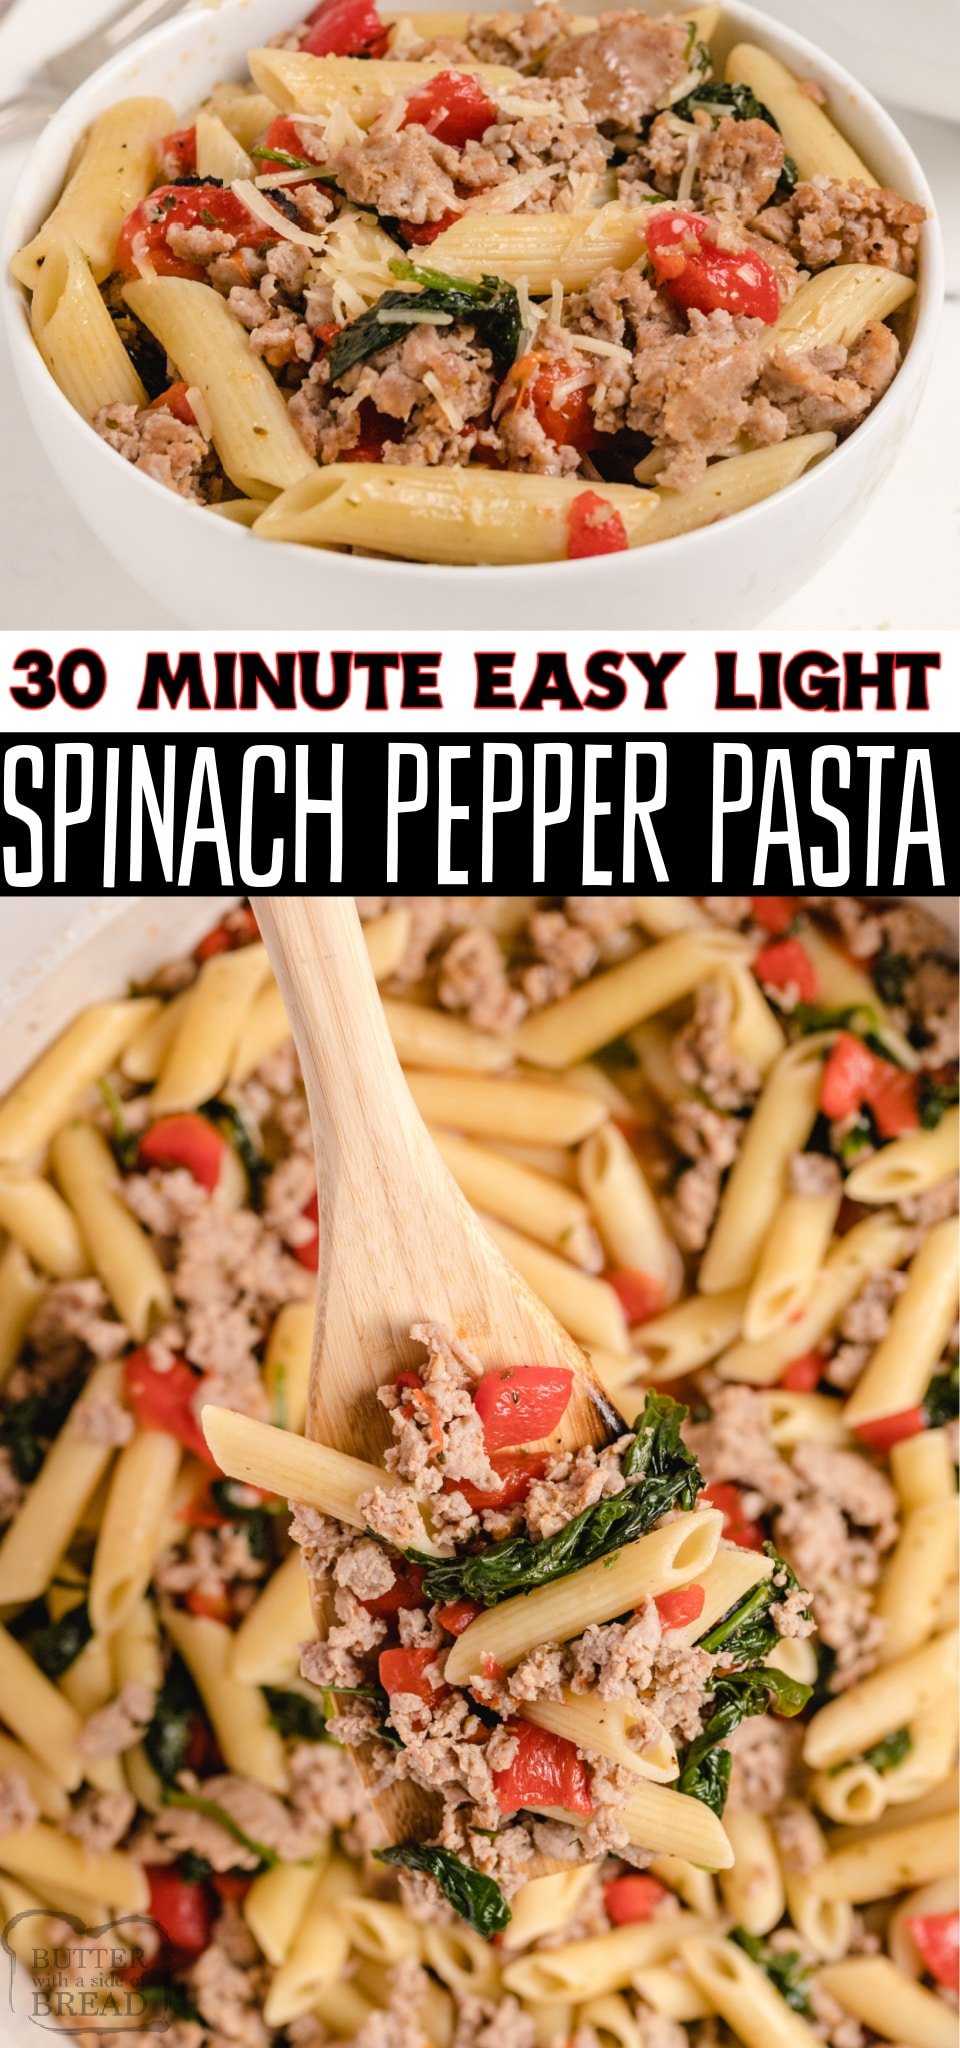 Light Spinach, Sausage & Pepper Pasta made easy in 30 minutes & so flavorful! Simple pasta recipe with turkey Italian sausage perfect for weeknight dinners.